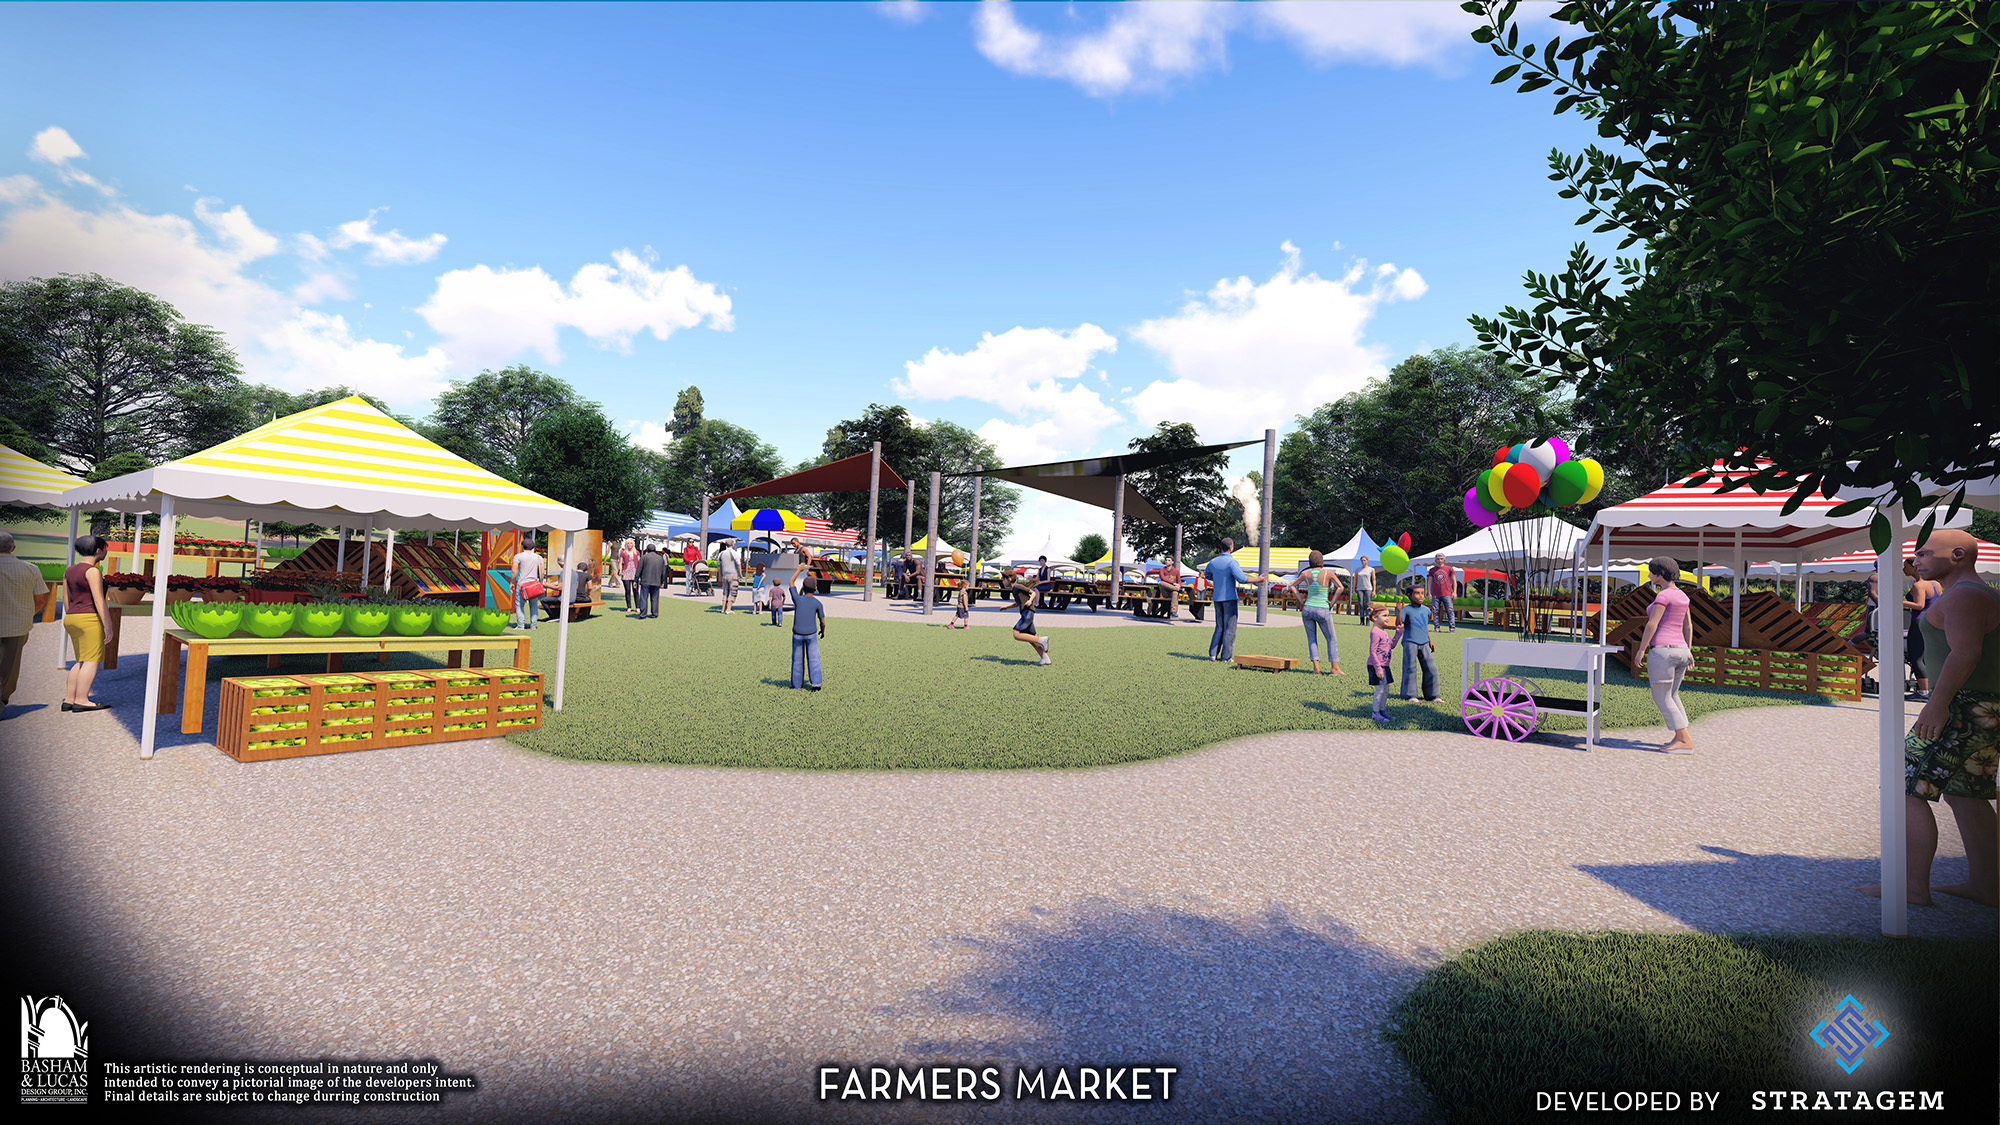 A farmers market is planned for the Aterro multiuse recreational park.